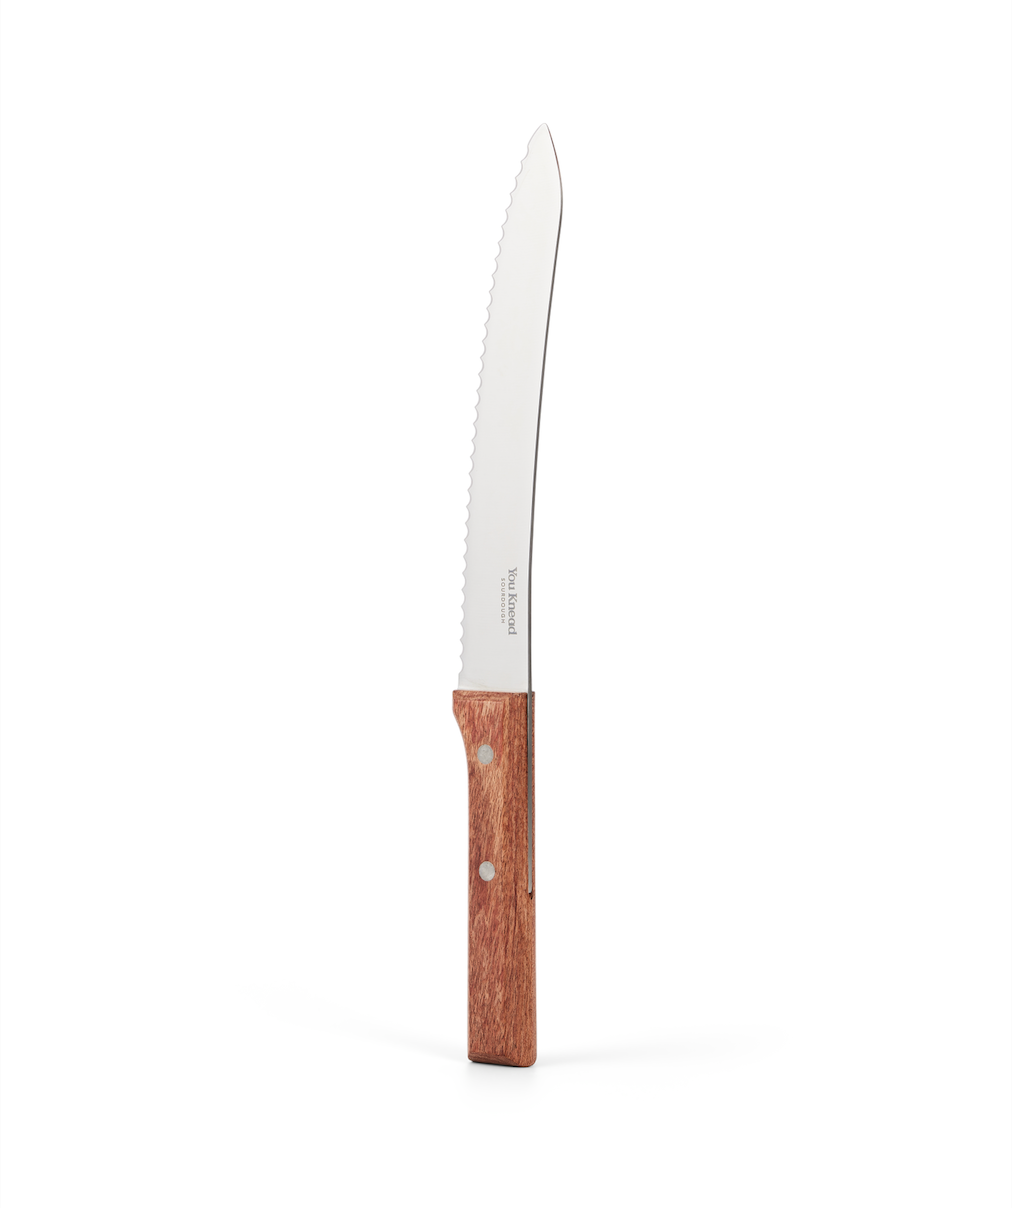 Serrated Bread Knife with Wooden Handle